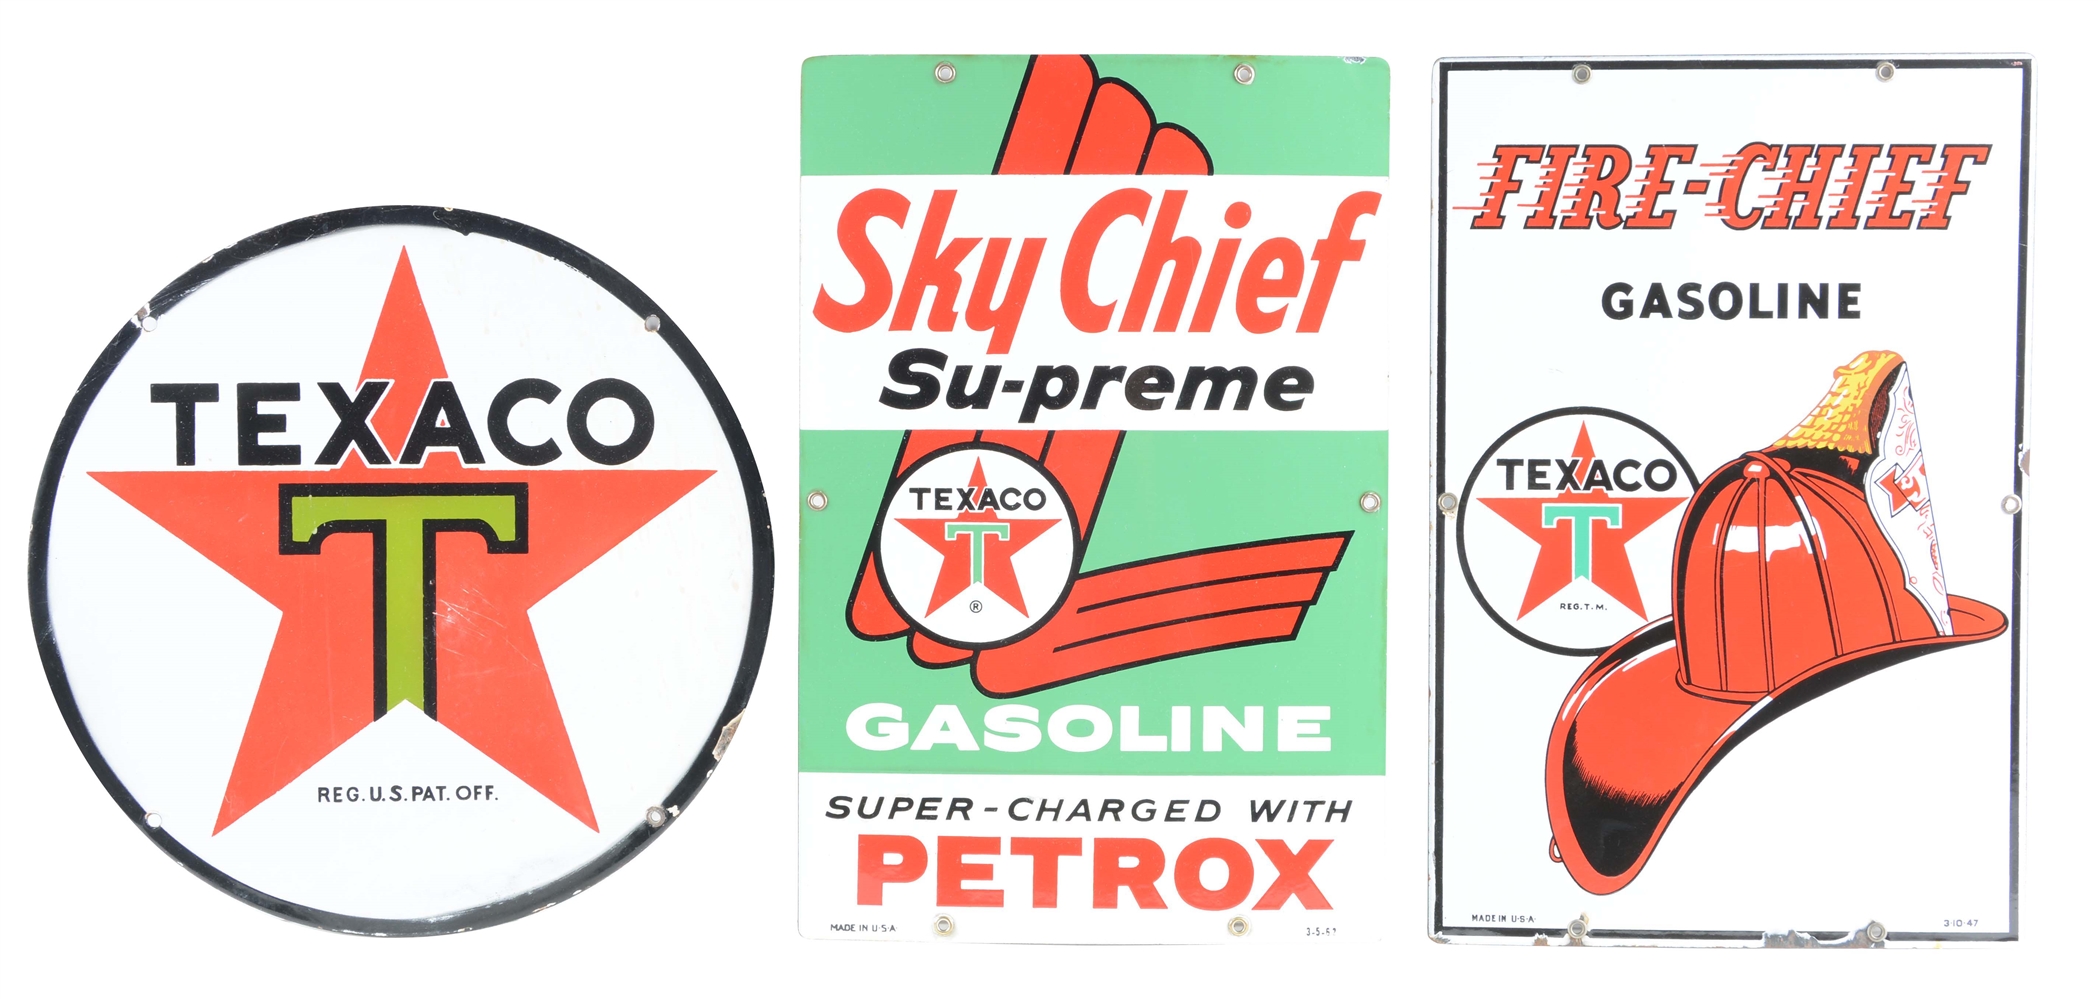 LOT OF 3: TEXACO PORCELAIN SIGNS. 